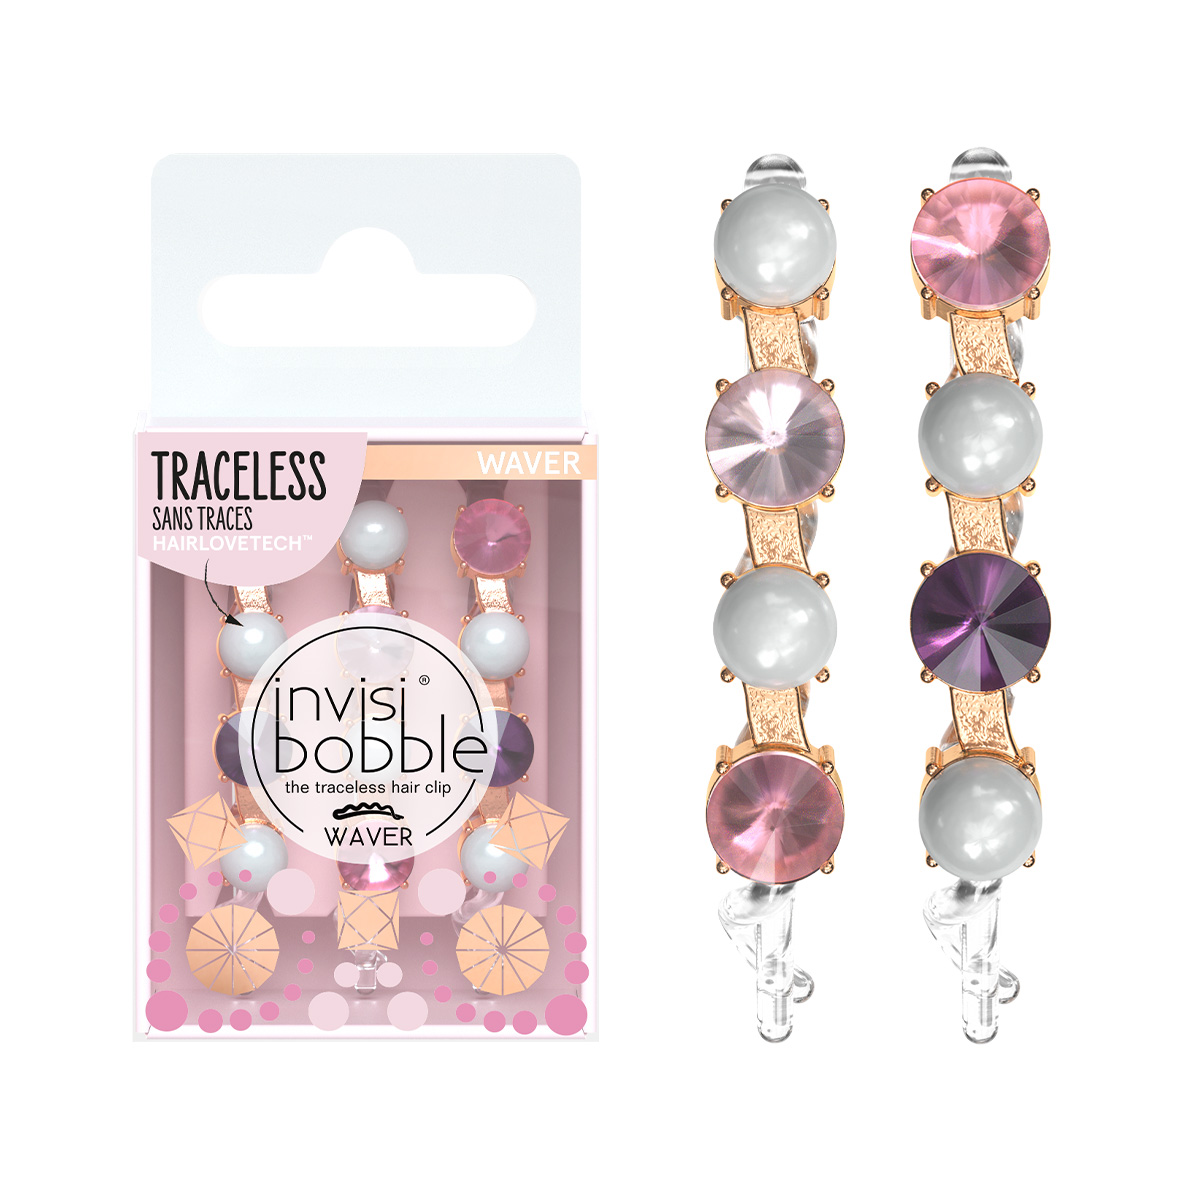 INVISIBOBBLE Заколка для волос / invisibobble WAVER British Royal To Bead or not to Bead